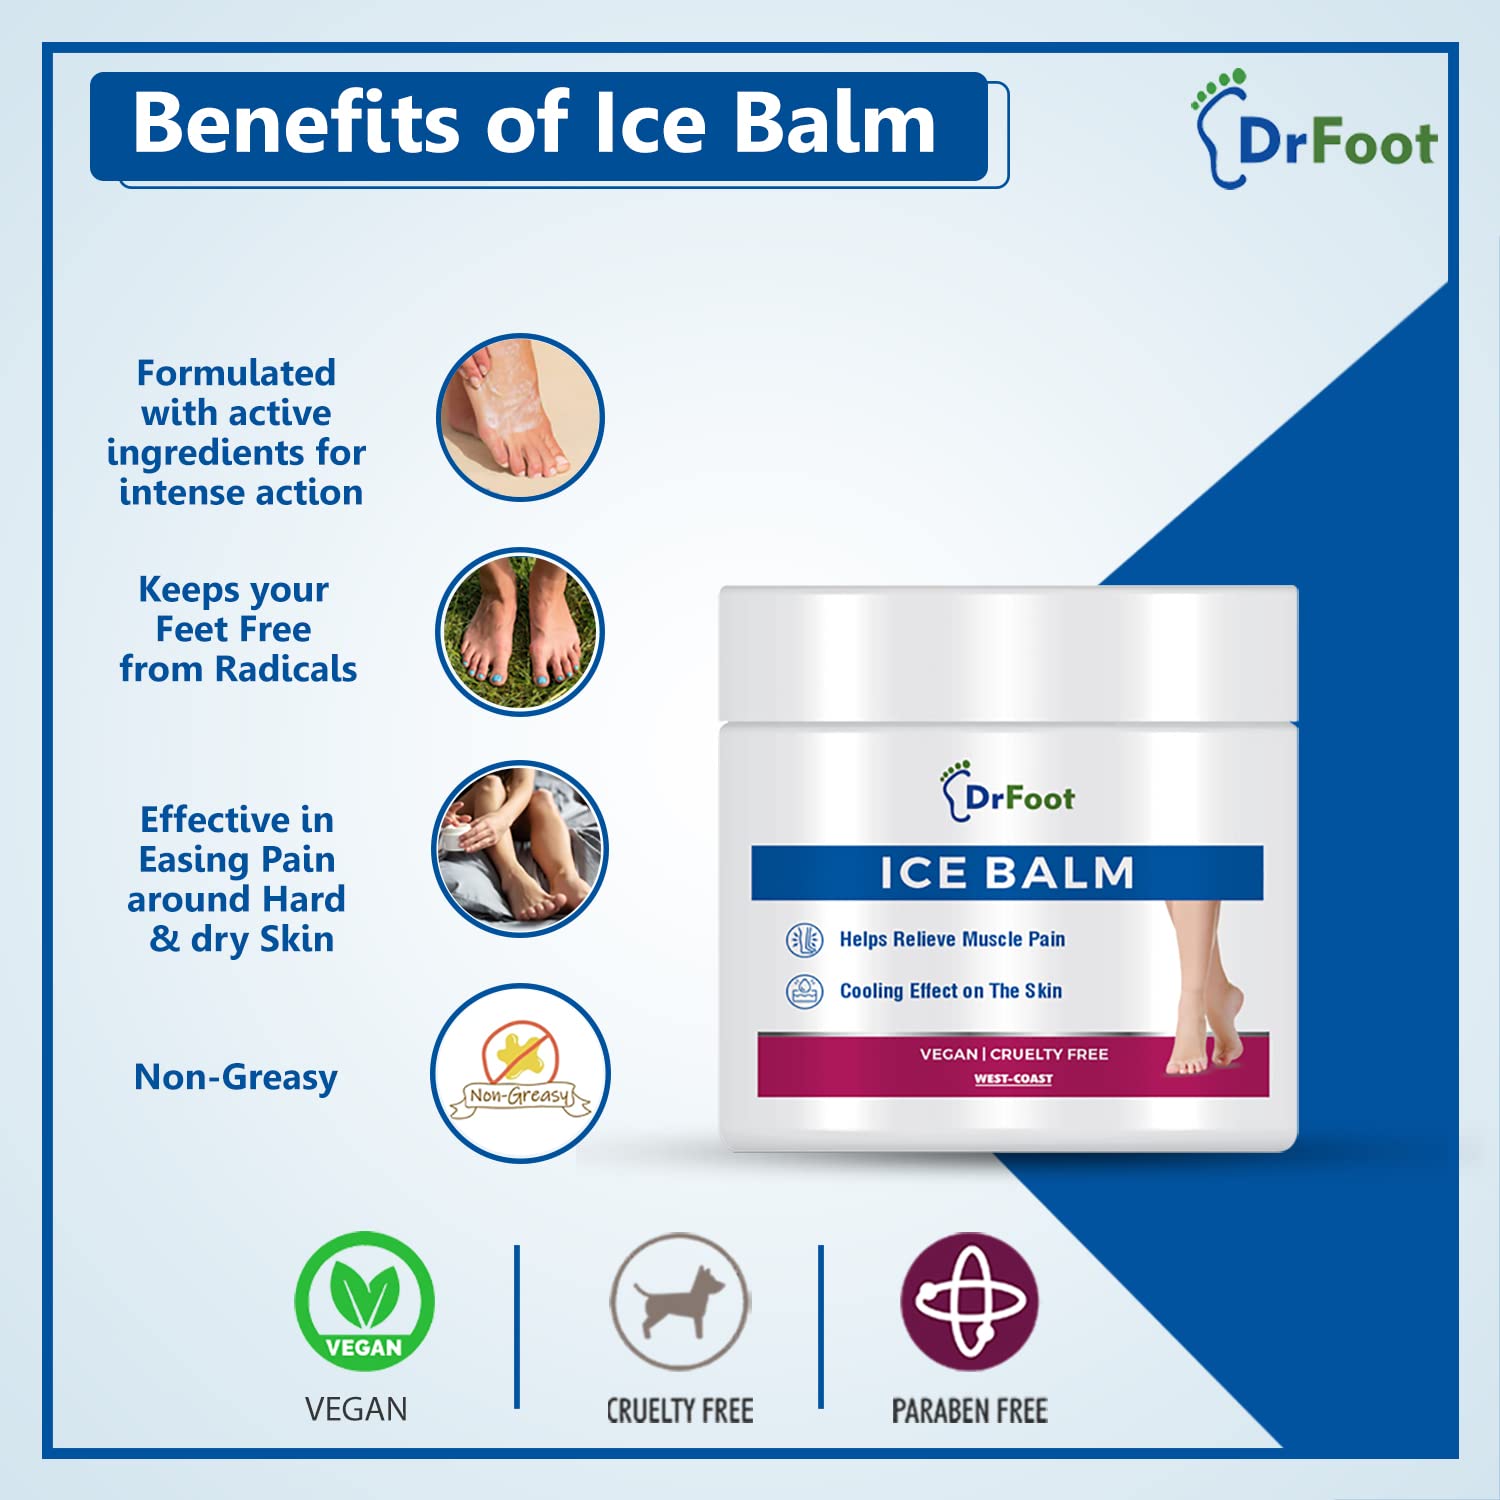 Dr Foot Ice Balm Cold, Fast Acting Feet Pain, Muscle Pain, Joint Pain Reliever with the Goodness of Menthol, Mentha Oil, Hemp Seed Oil, Glycerin - 100gm